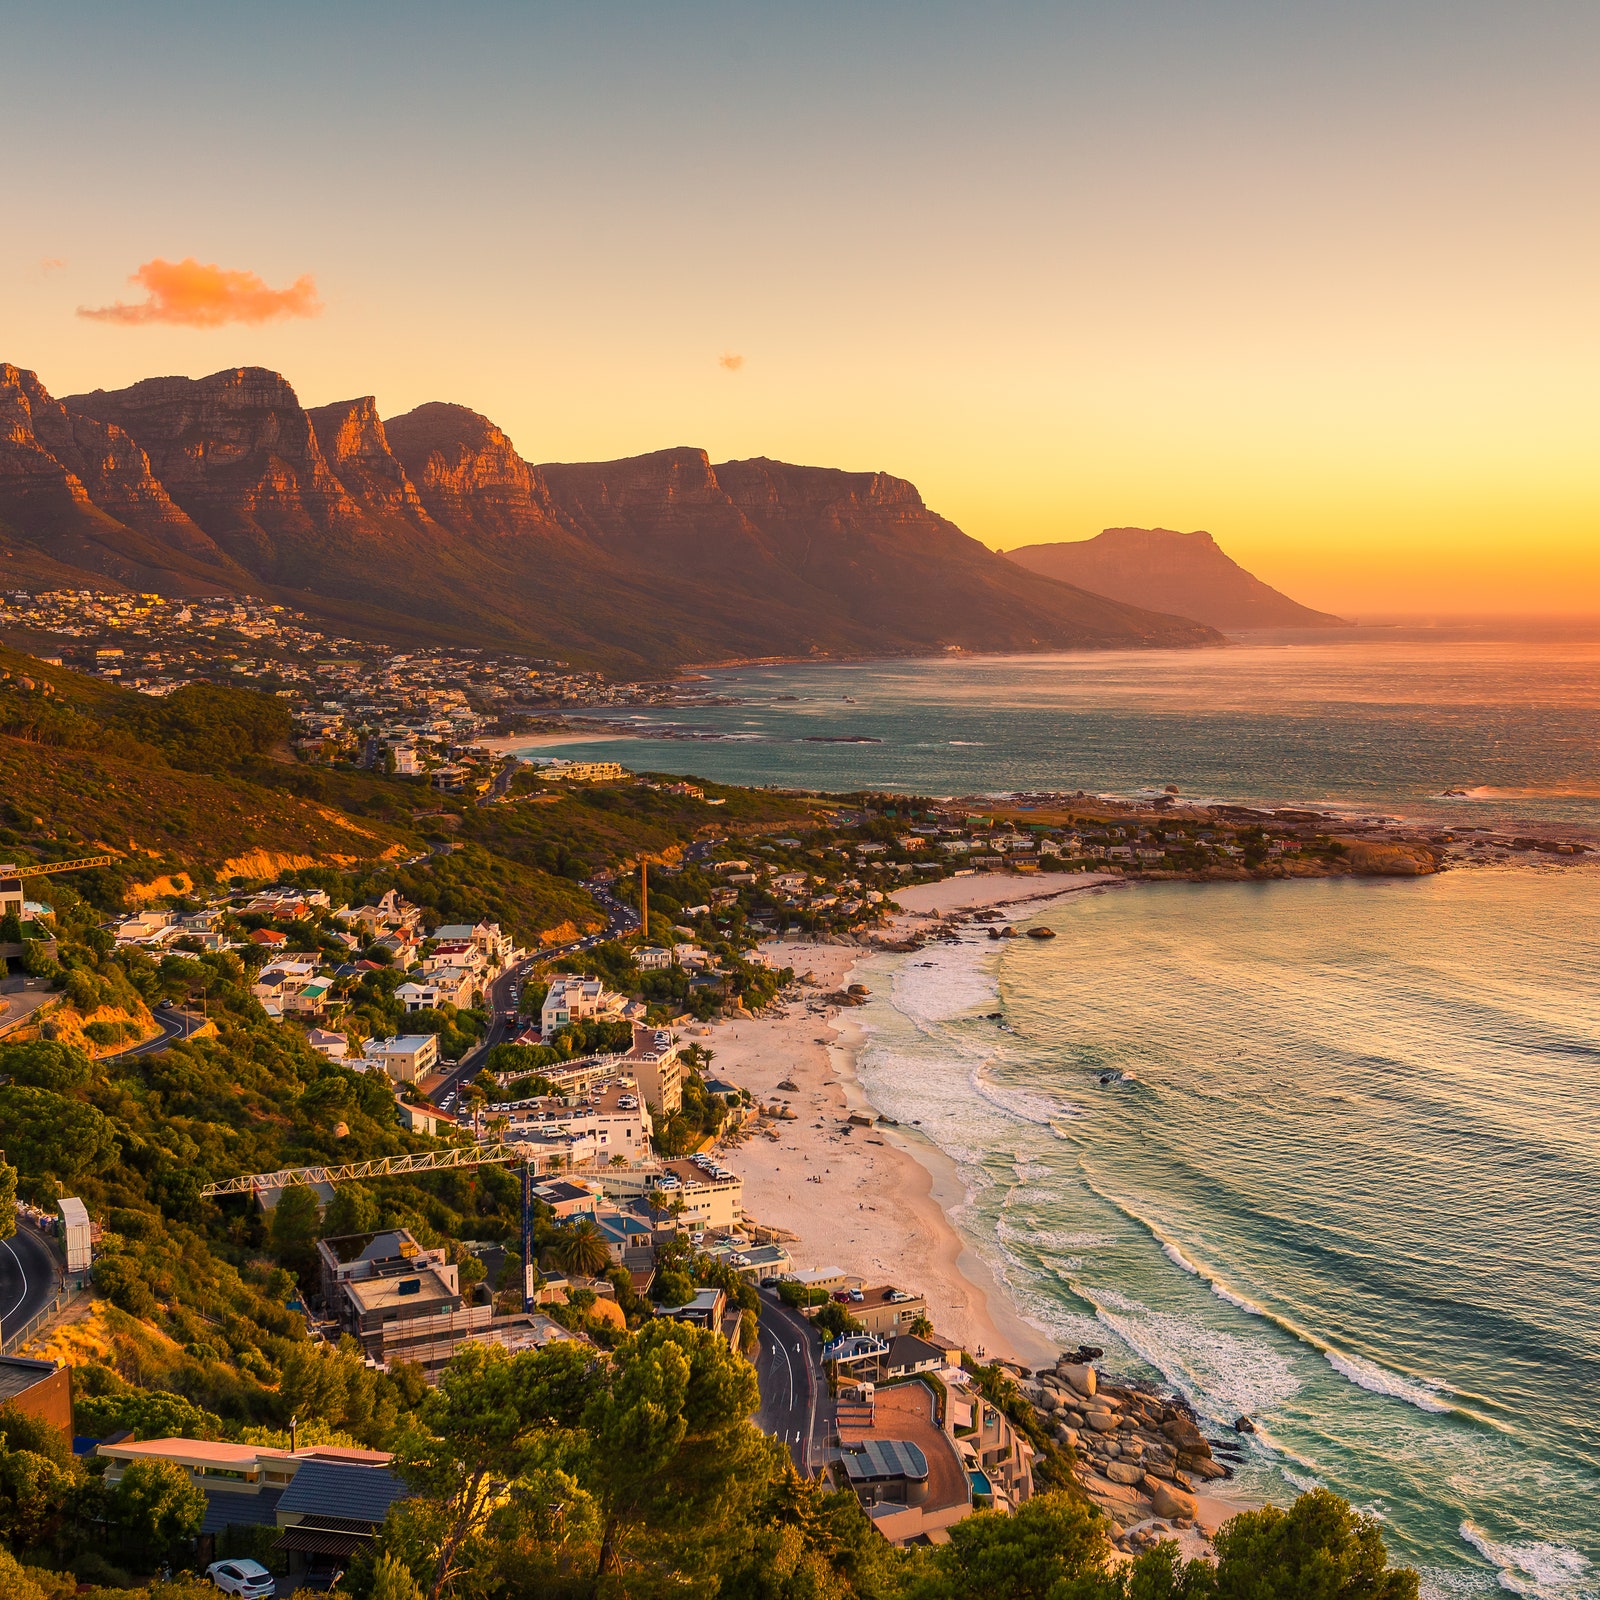 When Is the Best Time to Visit South Africa?